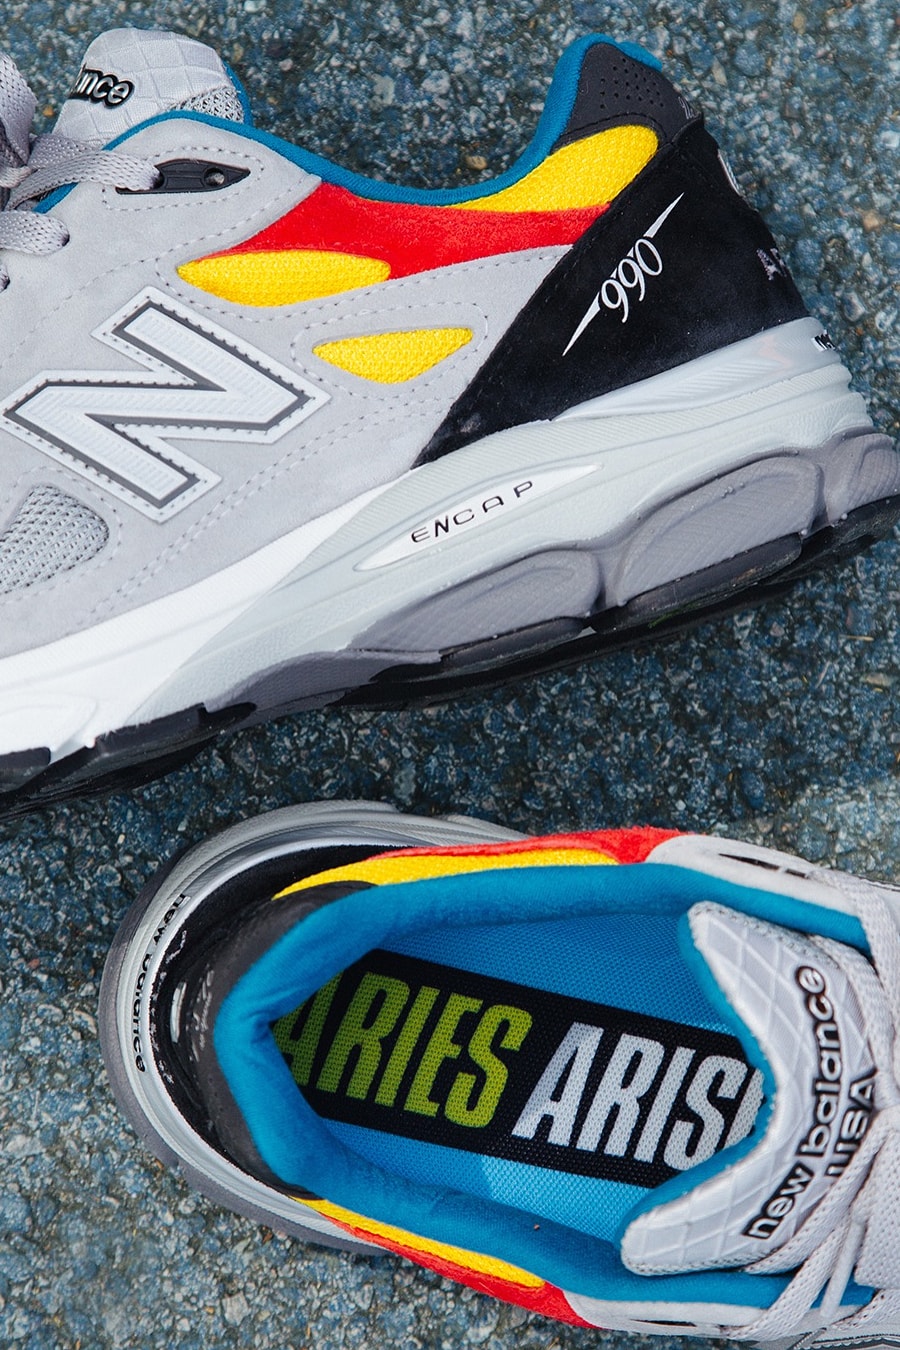 Aries New Balance 990v3 Color Multicolor 990 Grey Red Yellow Blue